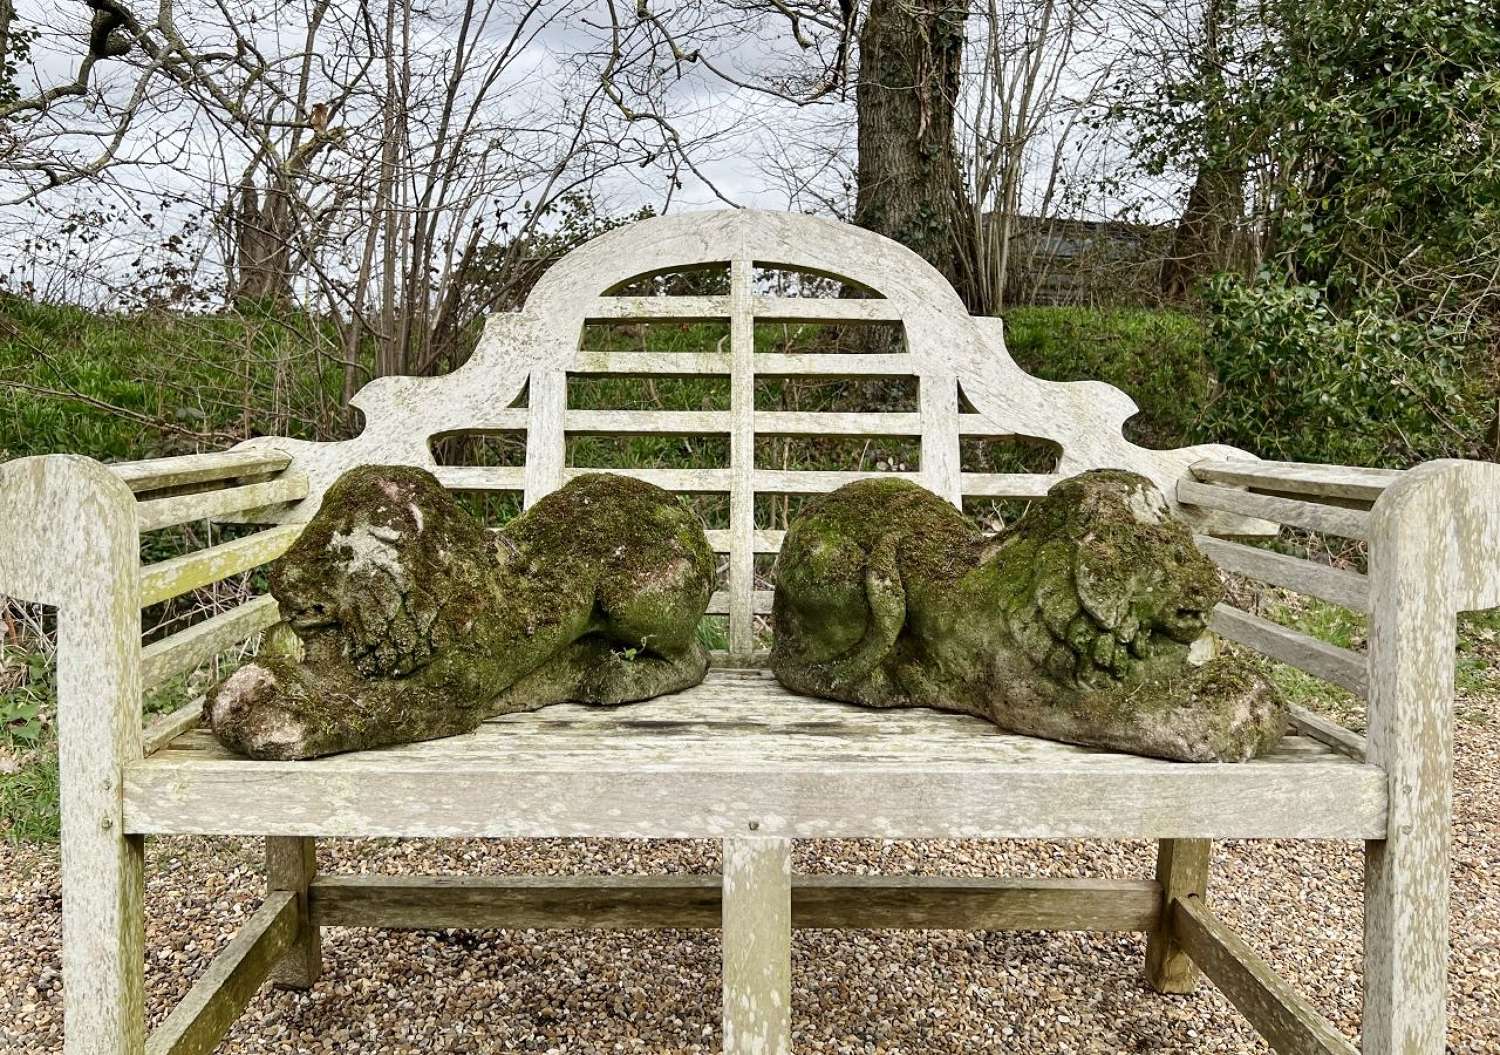 Pair of Mossy Lions